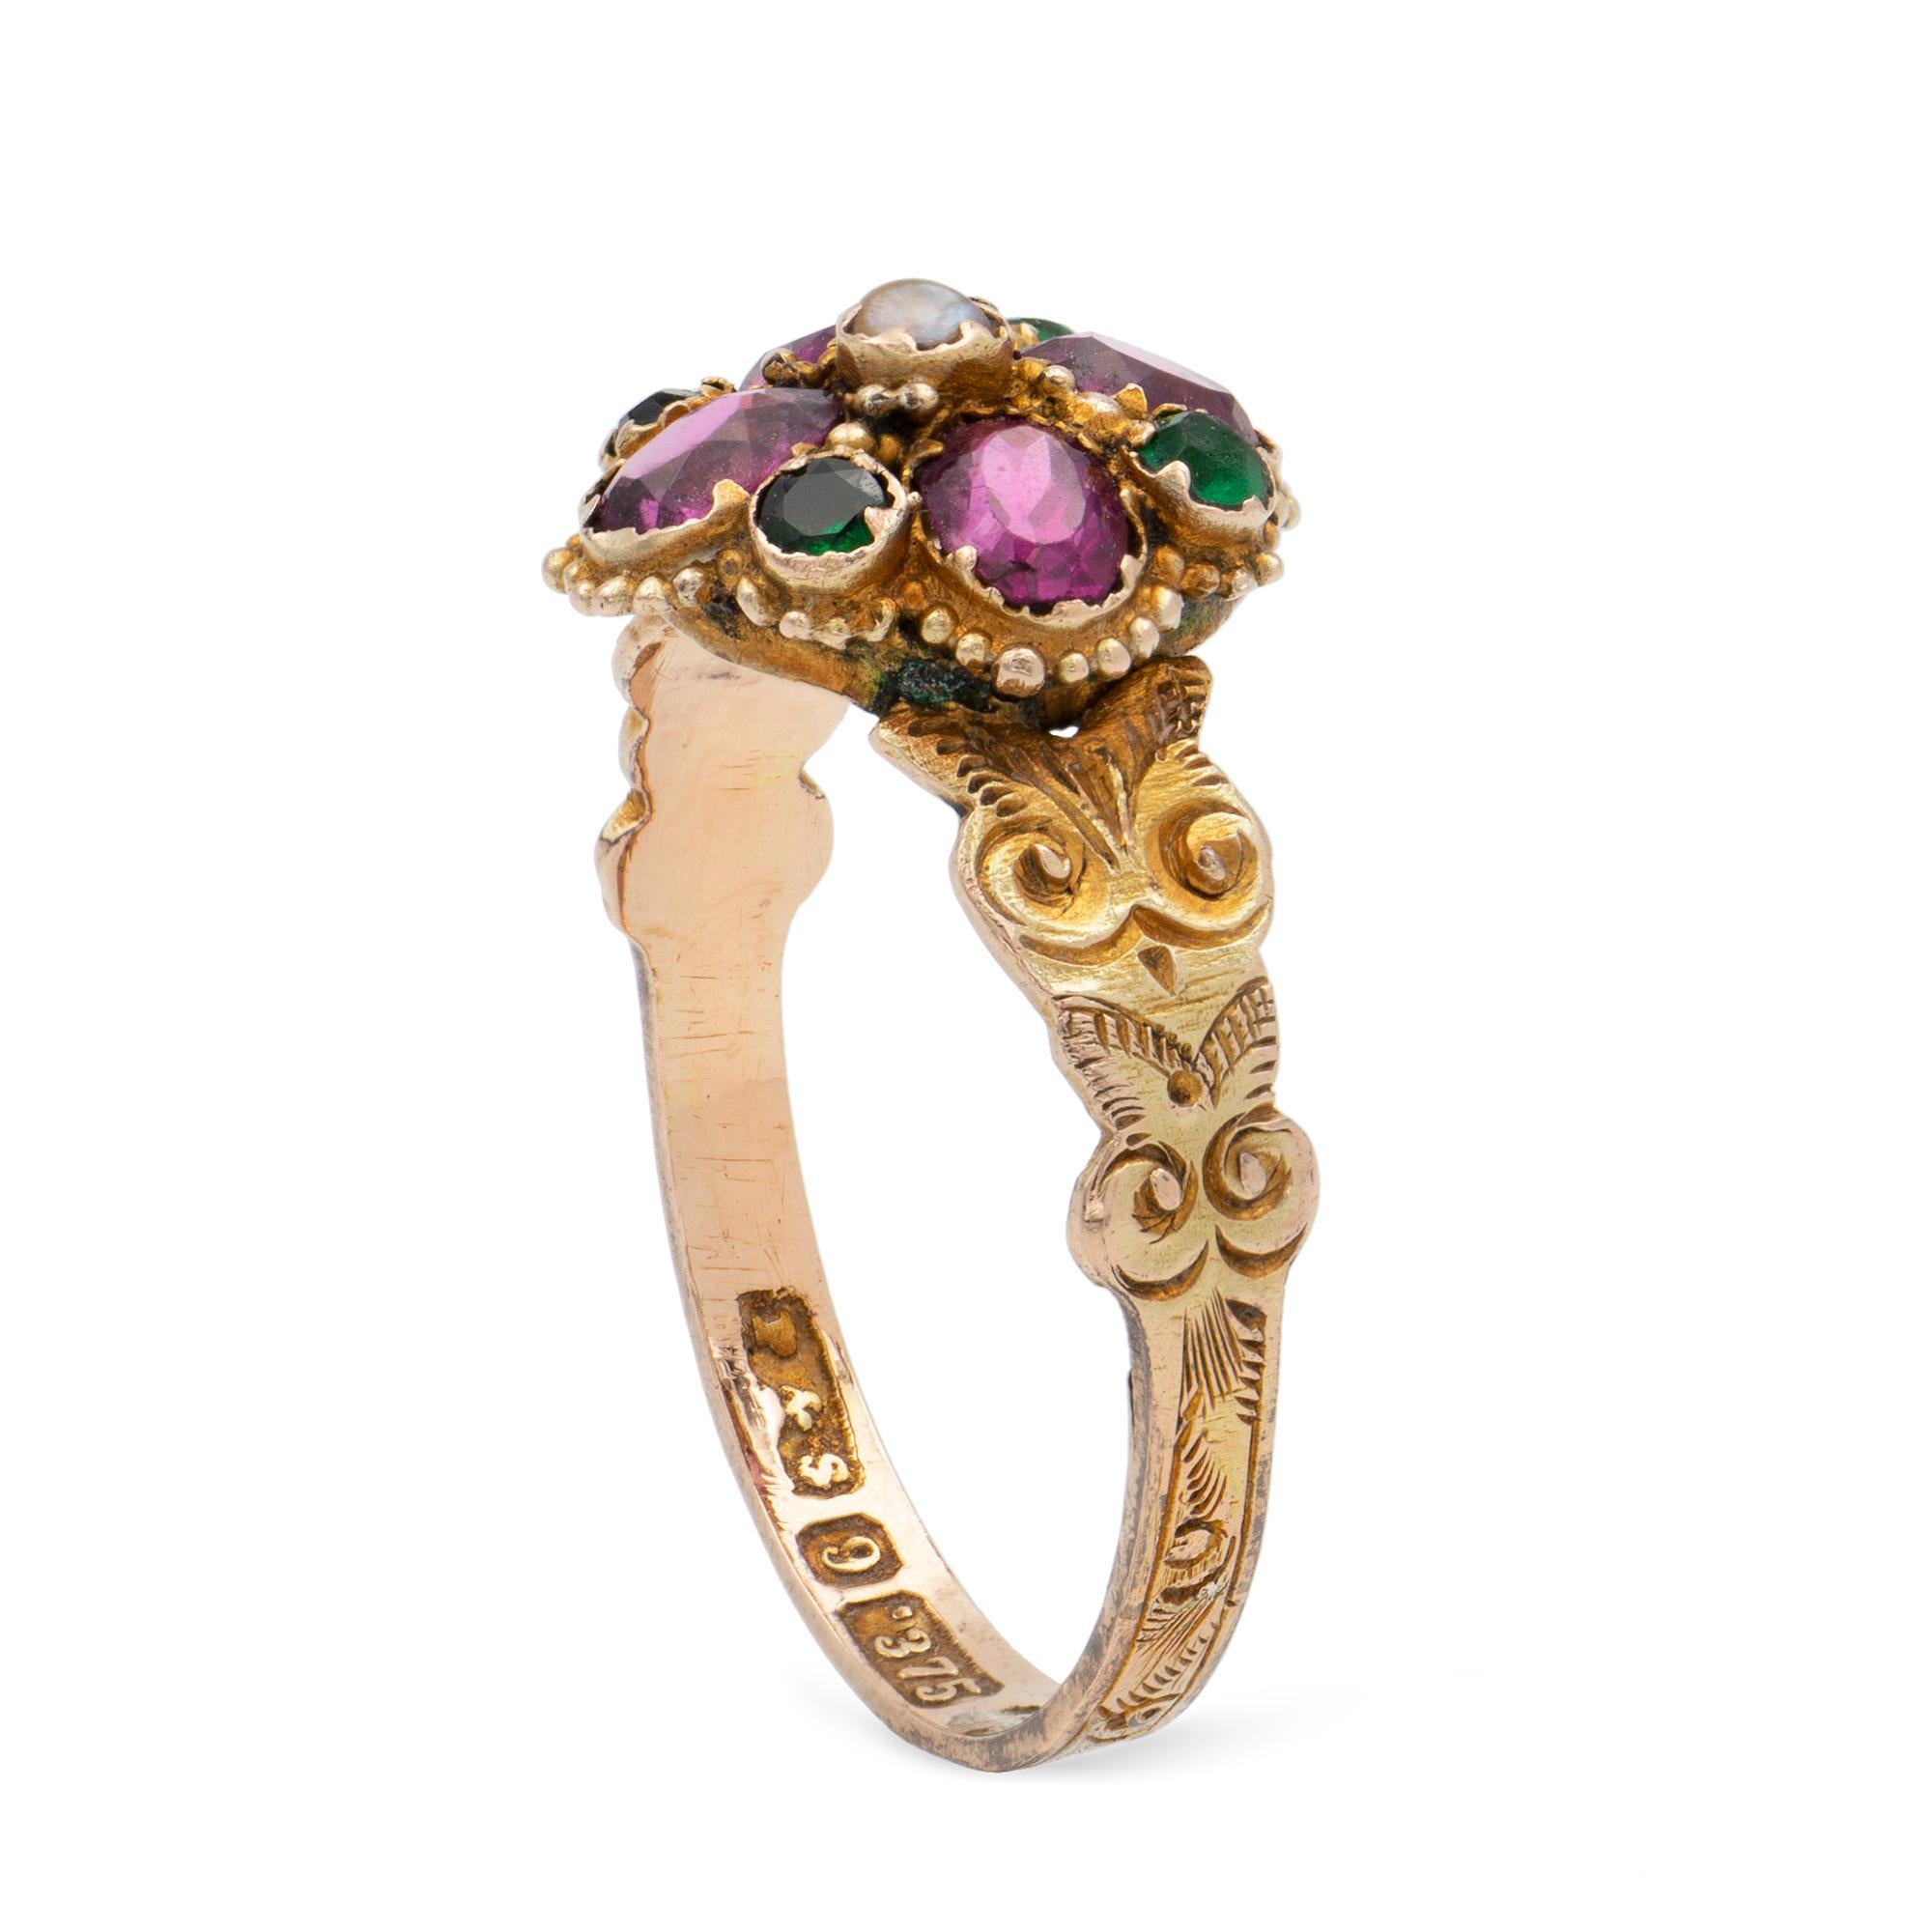 A Victorian garnet and emerald ring, to the centre a seed pearl surrounded by four oval faceted purple garnets, flanked with four round emeralds, all rub-over set to a yellow gold shank engraved with scroll and foliate decorations, marked 9ct gold,